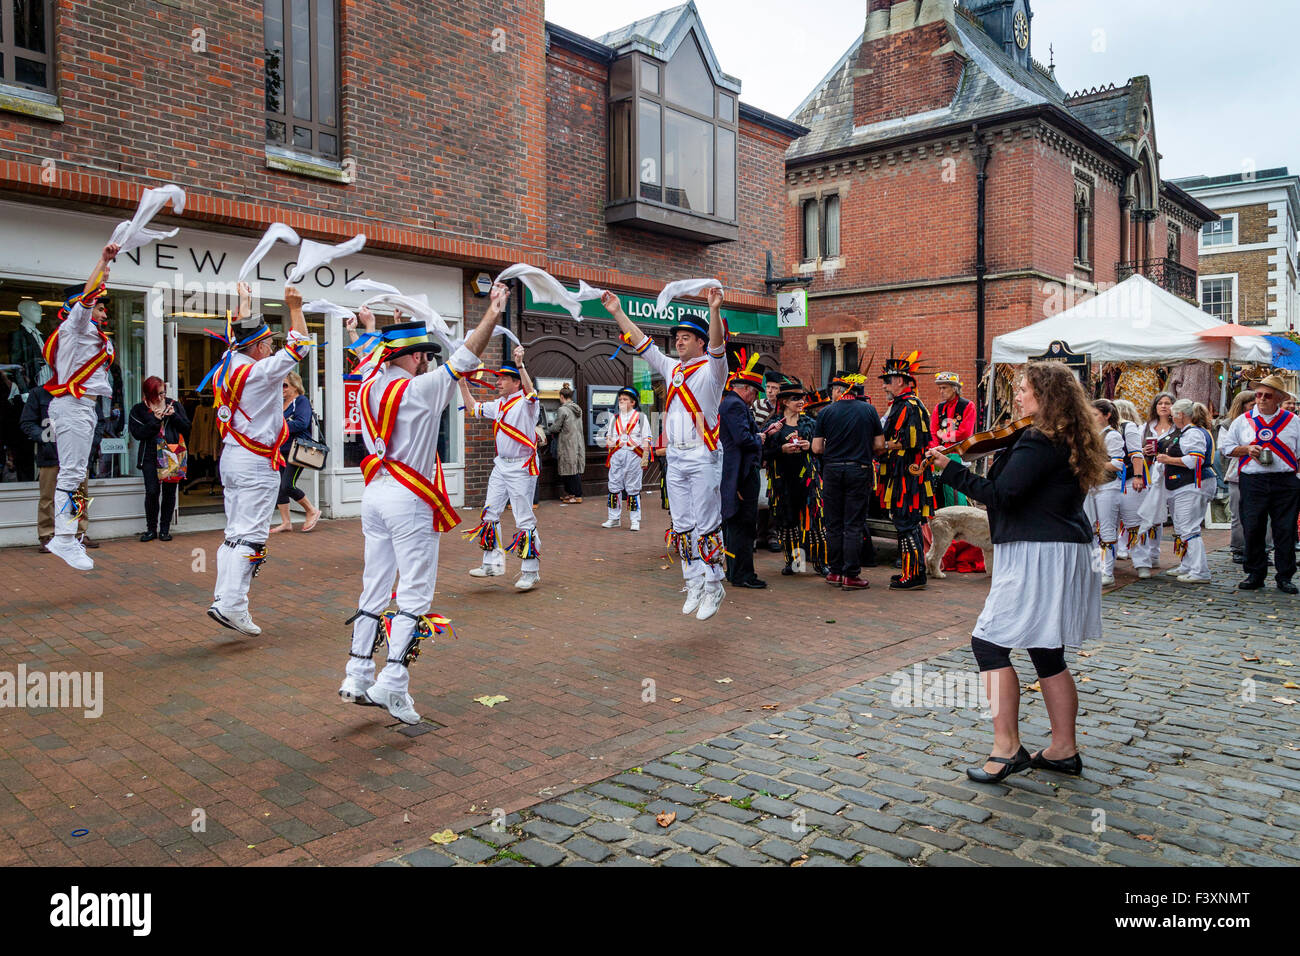 Mad Jack's Morris Side Perform In Lewes High Street During The Towns Annual Folk Festival, Lewes, Sussex, UK Stock Photo